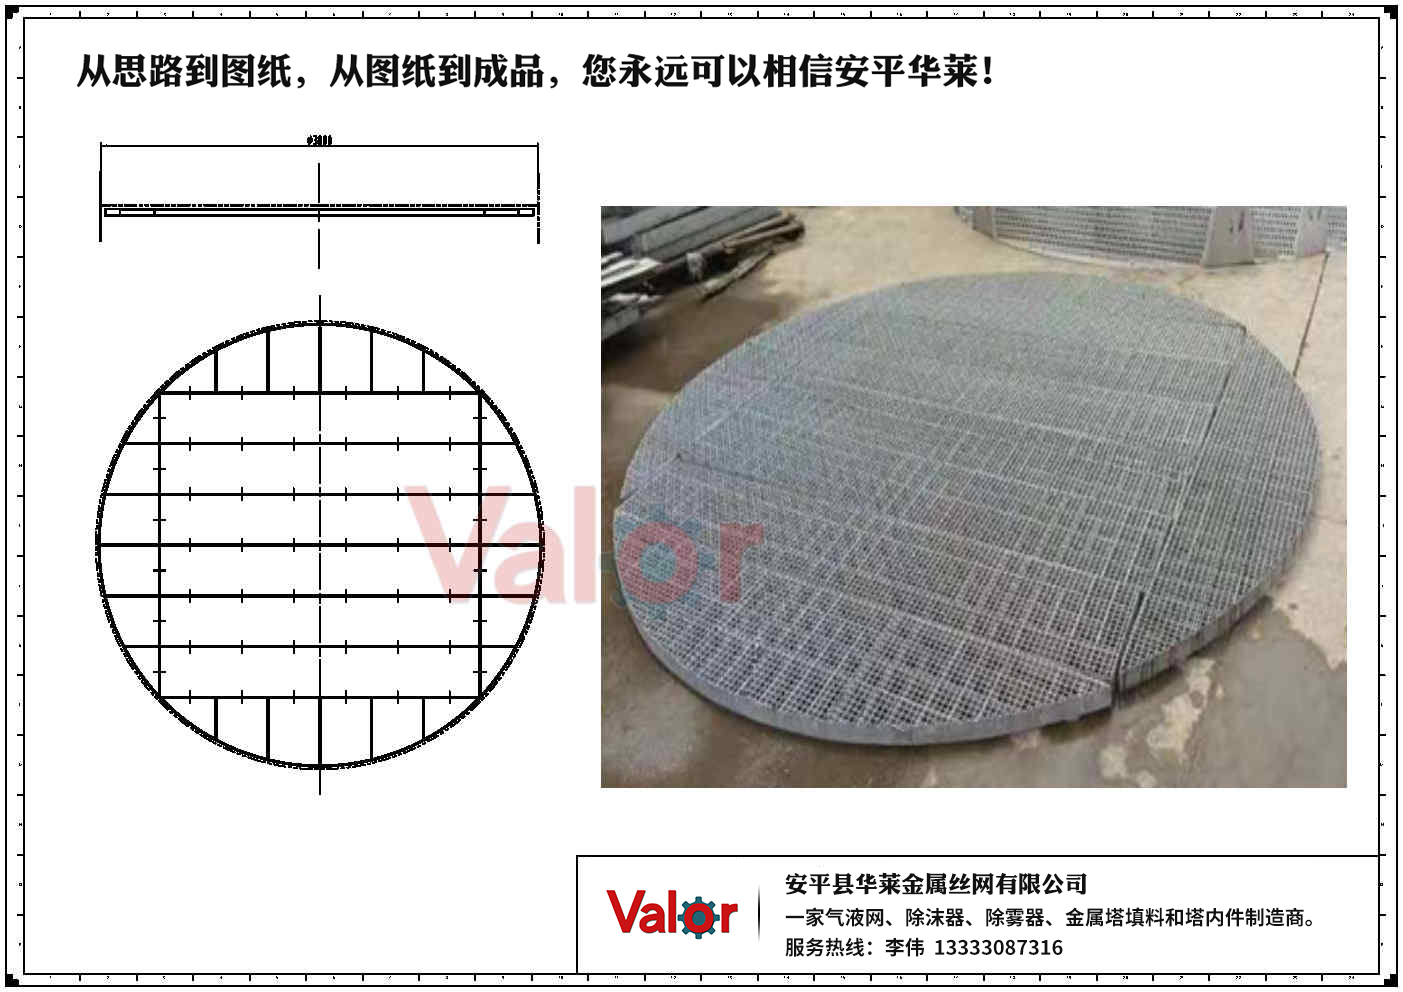 segmented random packing bed limiter, welded with customized wire mesh